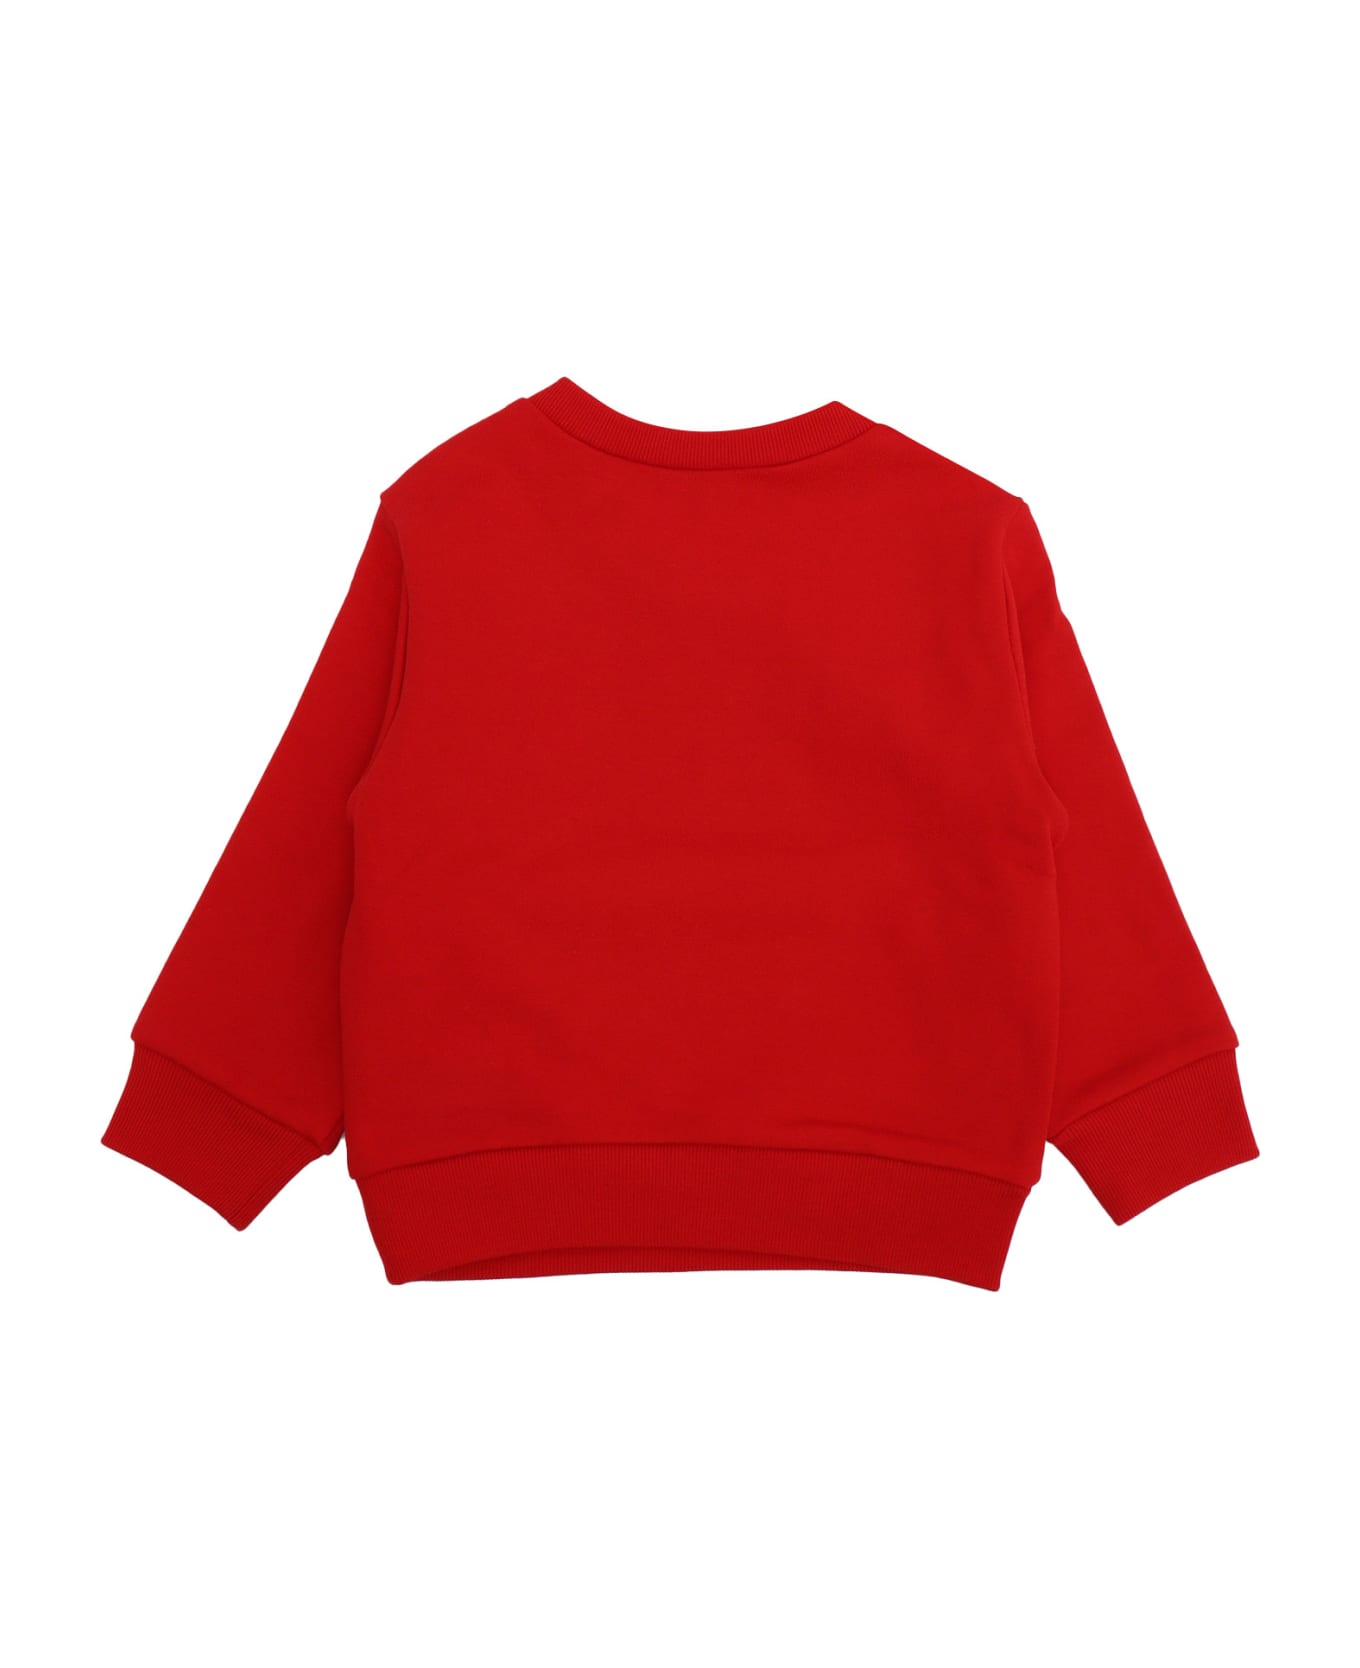 Dsquared2 D-squared2 Sweatshirt For Children - RED